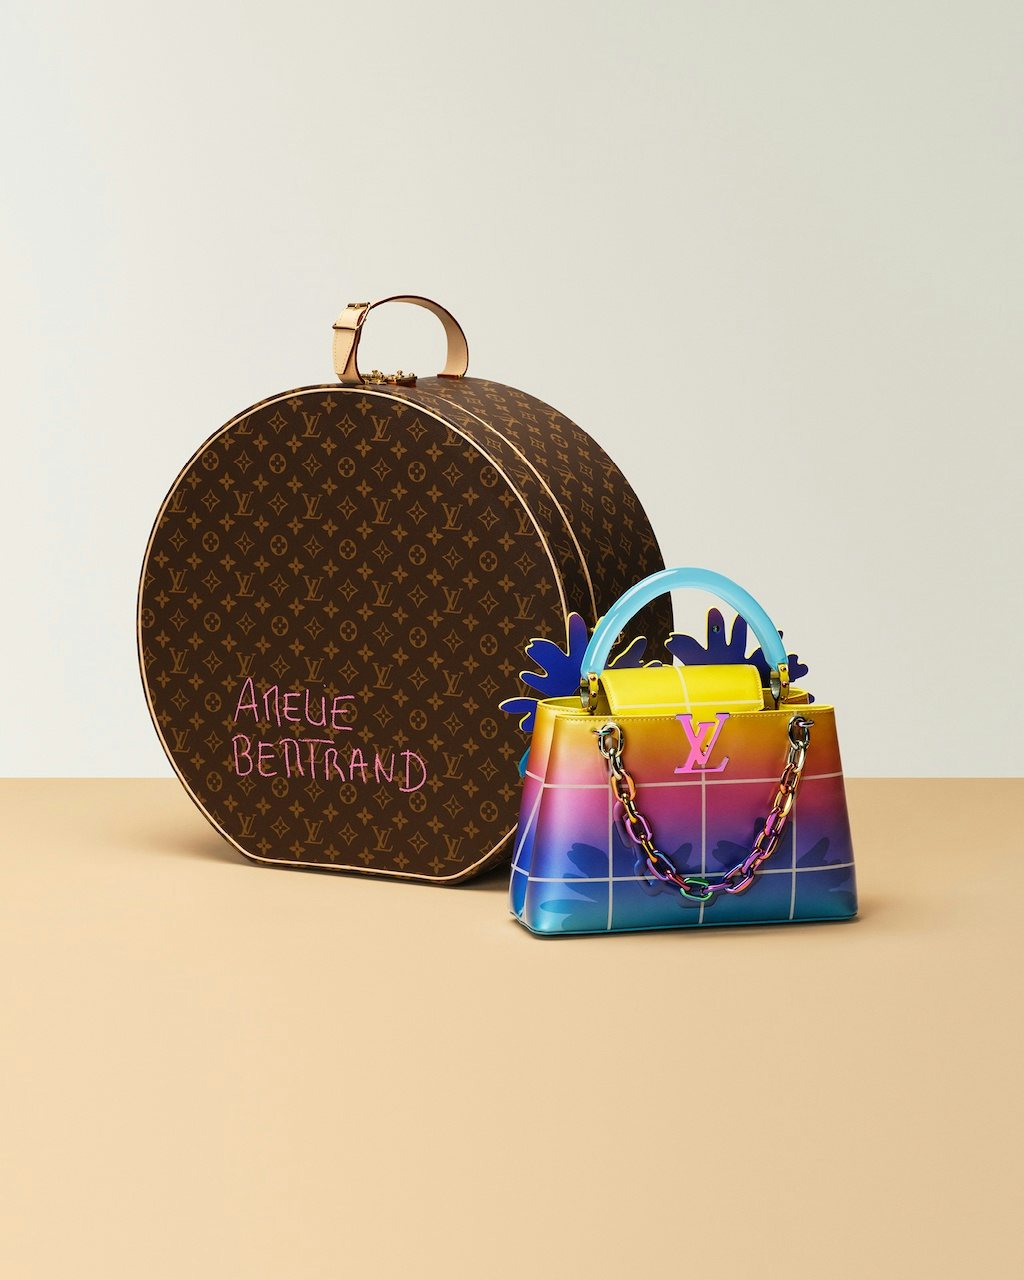 22 artists have been invited by Louis Vuitton to reimagine the Capucines bag for a Sotheby's auction. Photo: Louis Vuitton